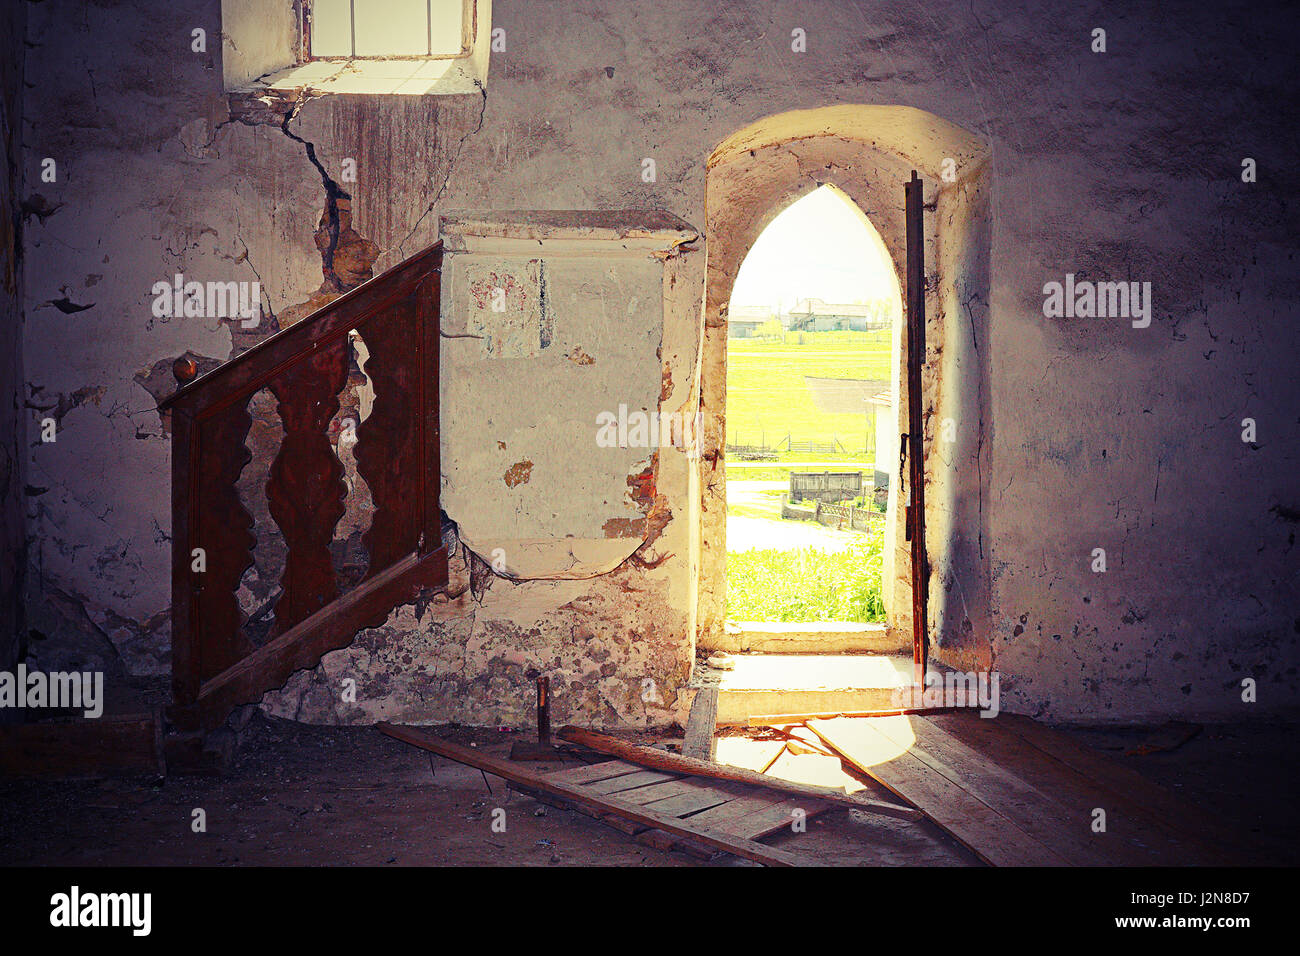 interior of abandoned old gothic church, damage on walls Stock Photo